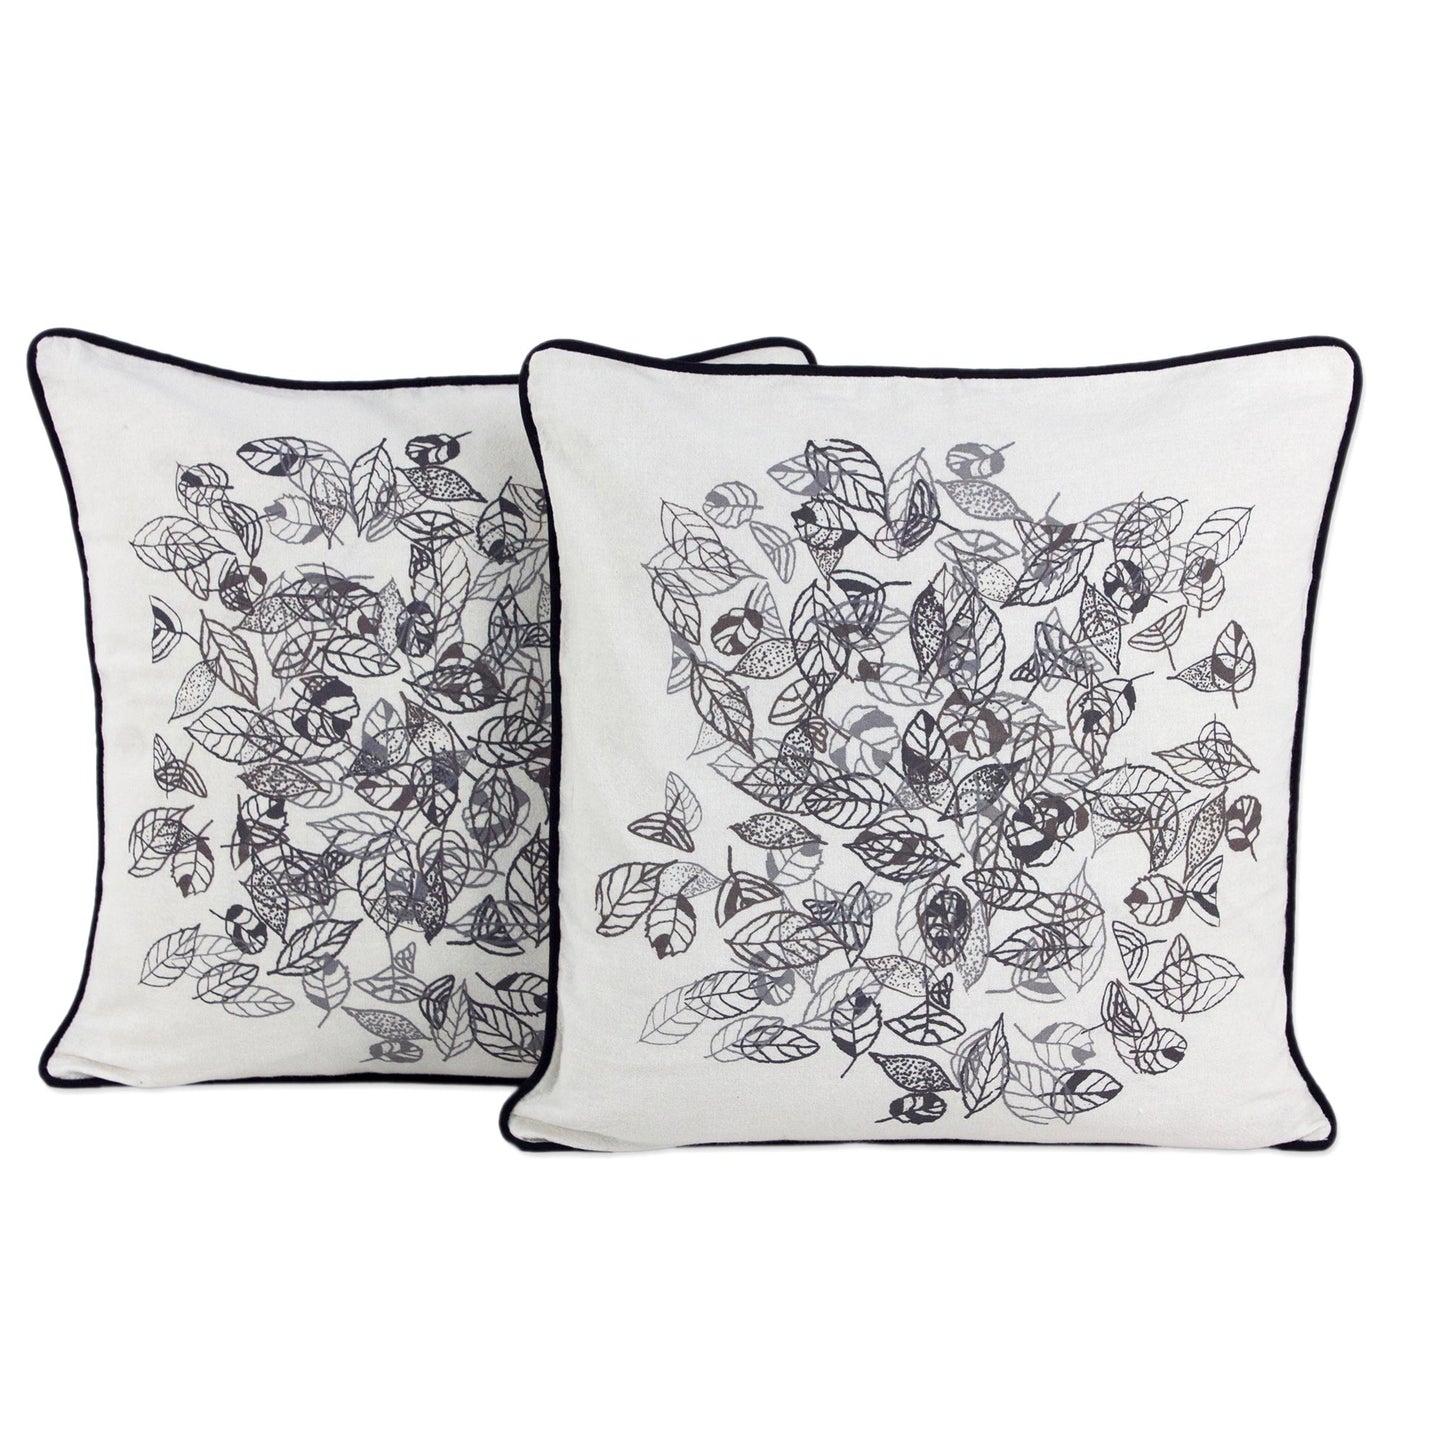 Falling Leaves Fair Trade 100% Cotton Cushion Covers with Leaf Motif (Pair)